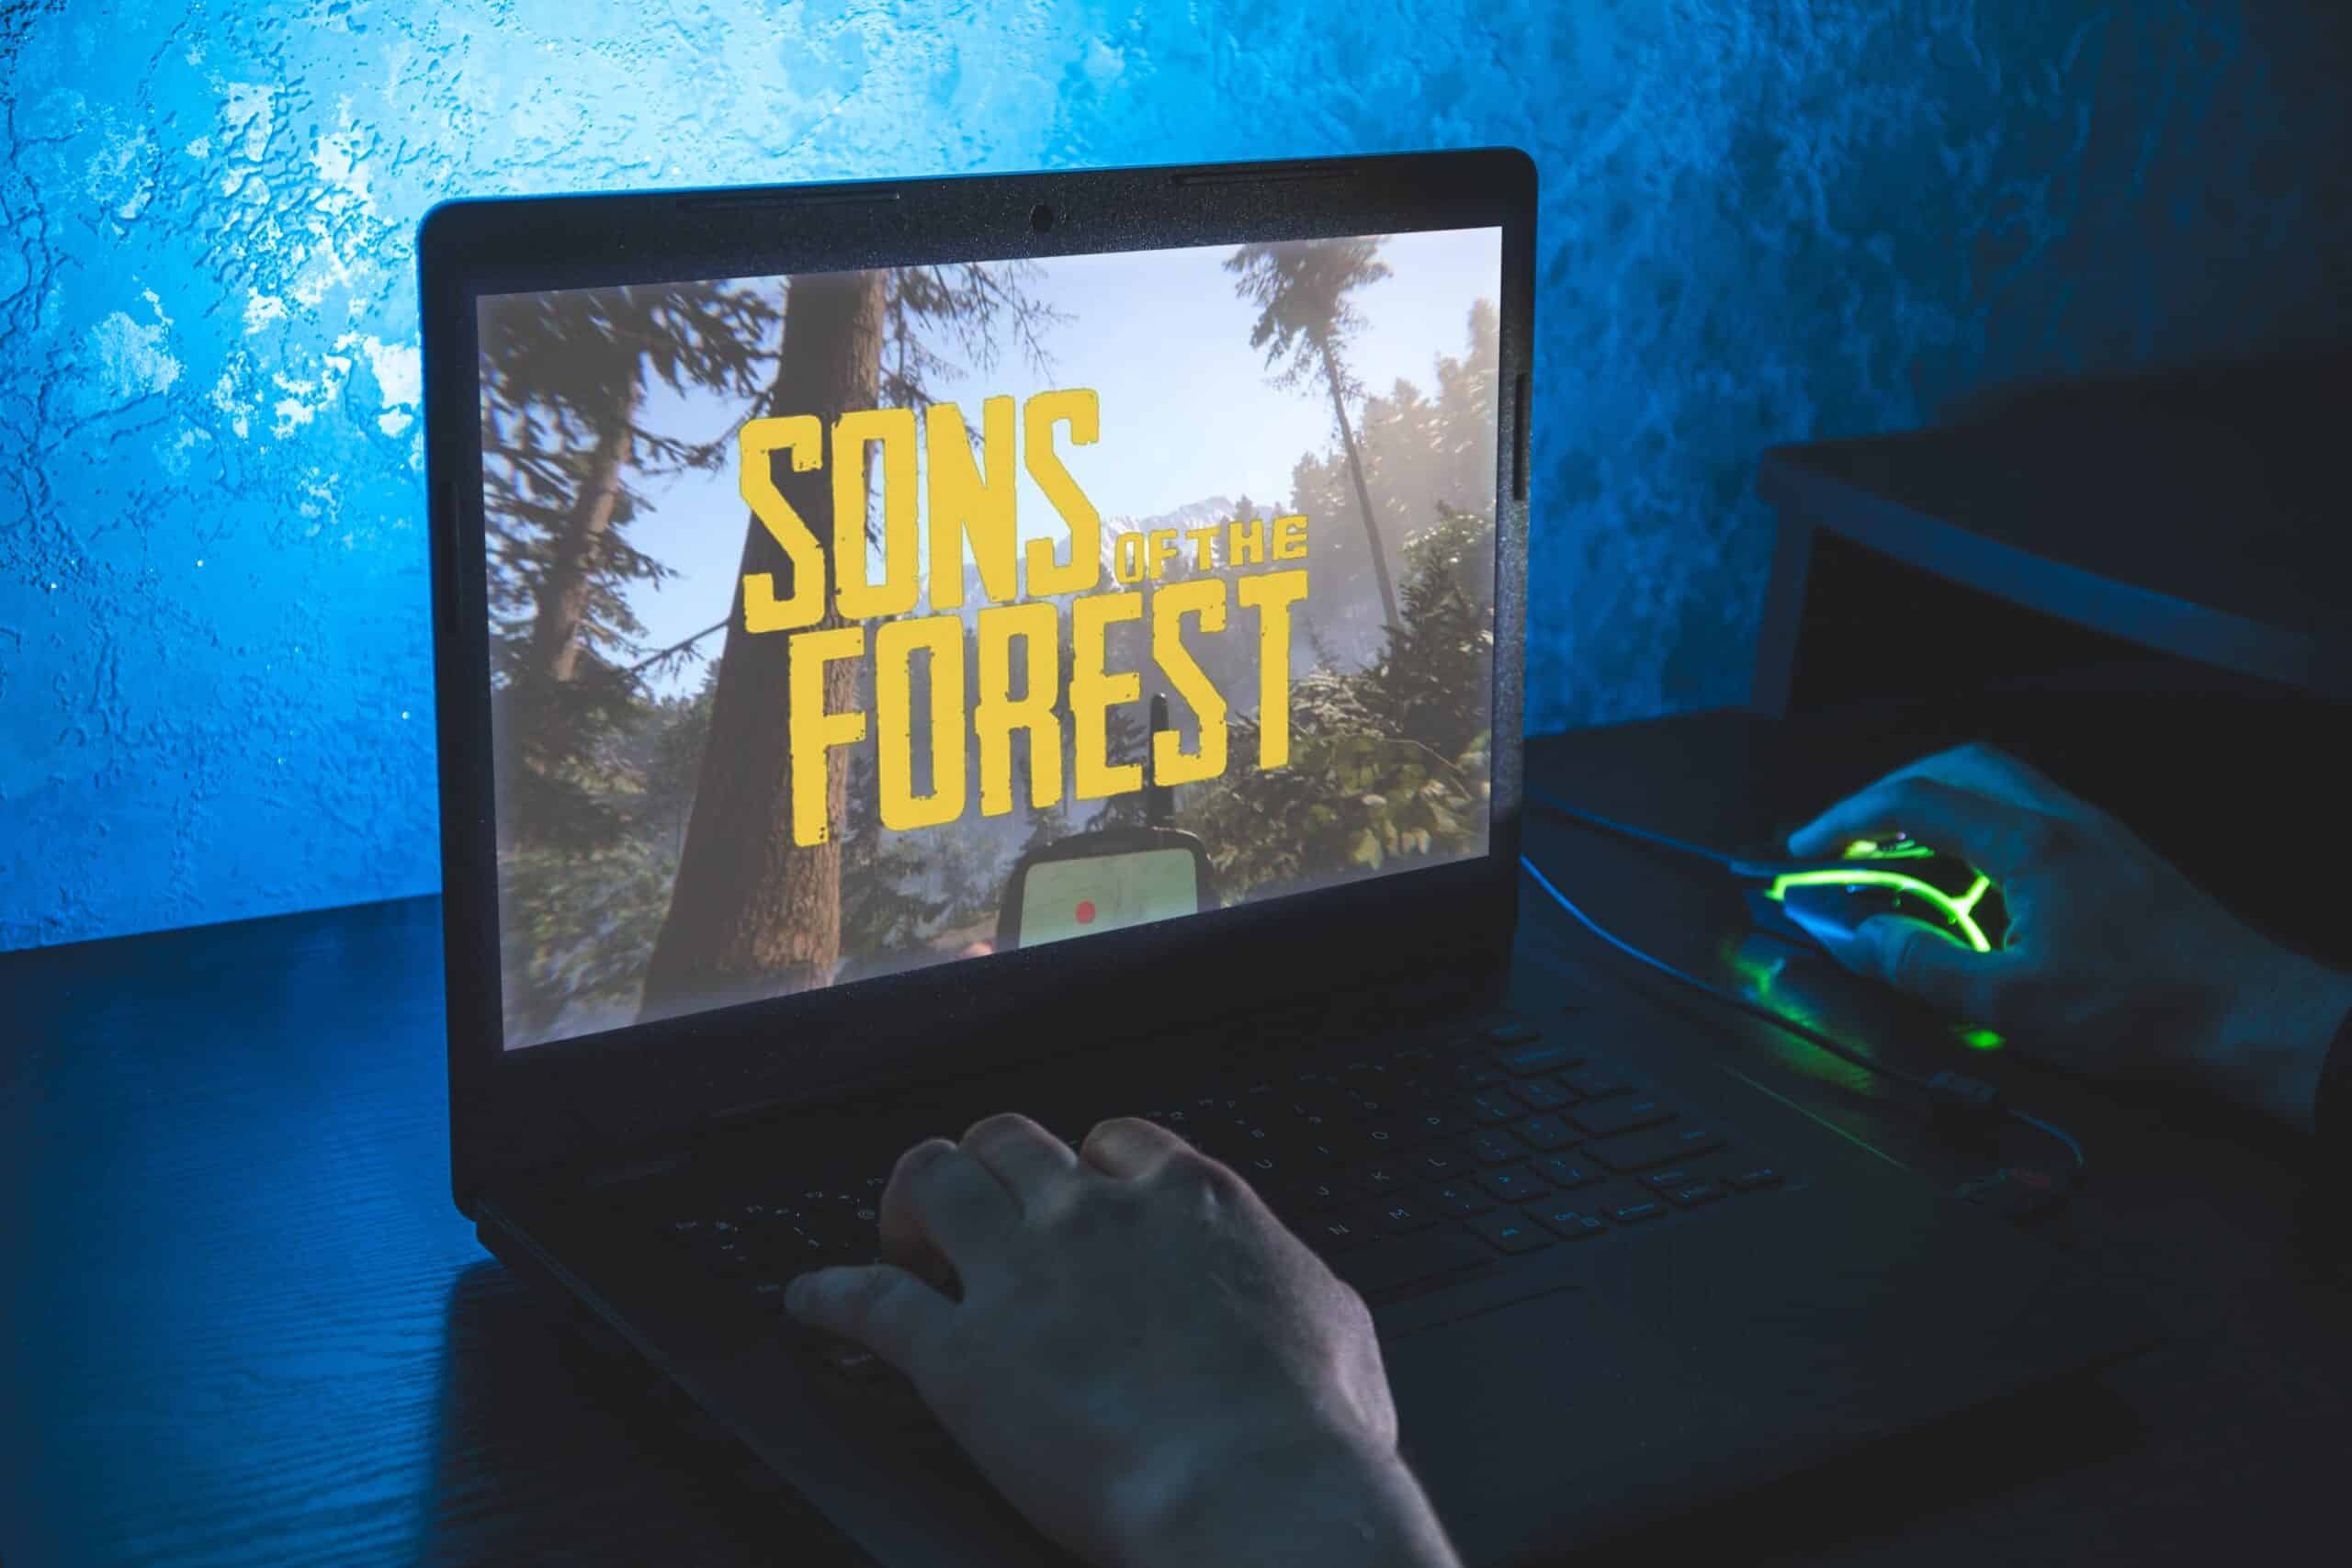 Sons of the Forest System Requirements - Can I Run It